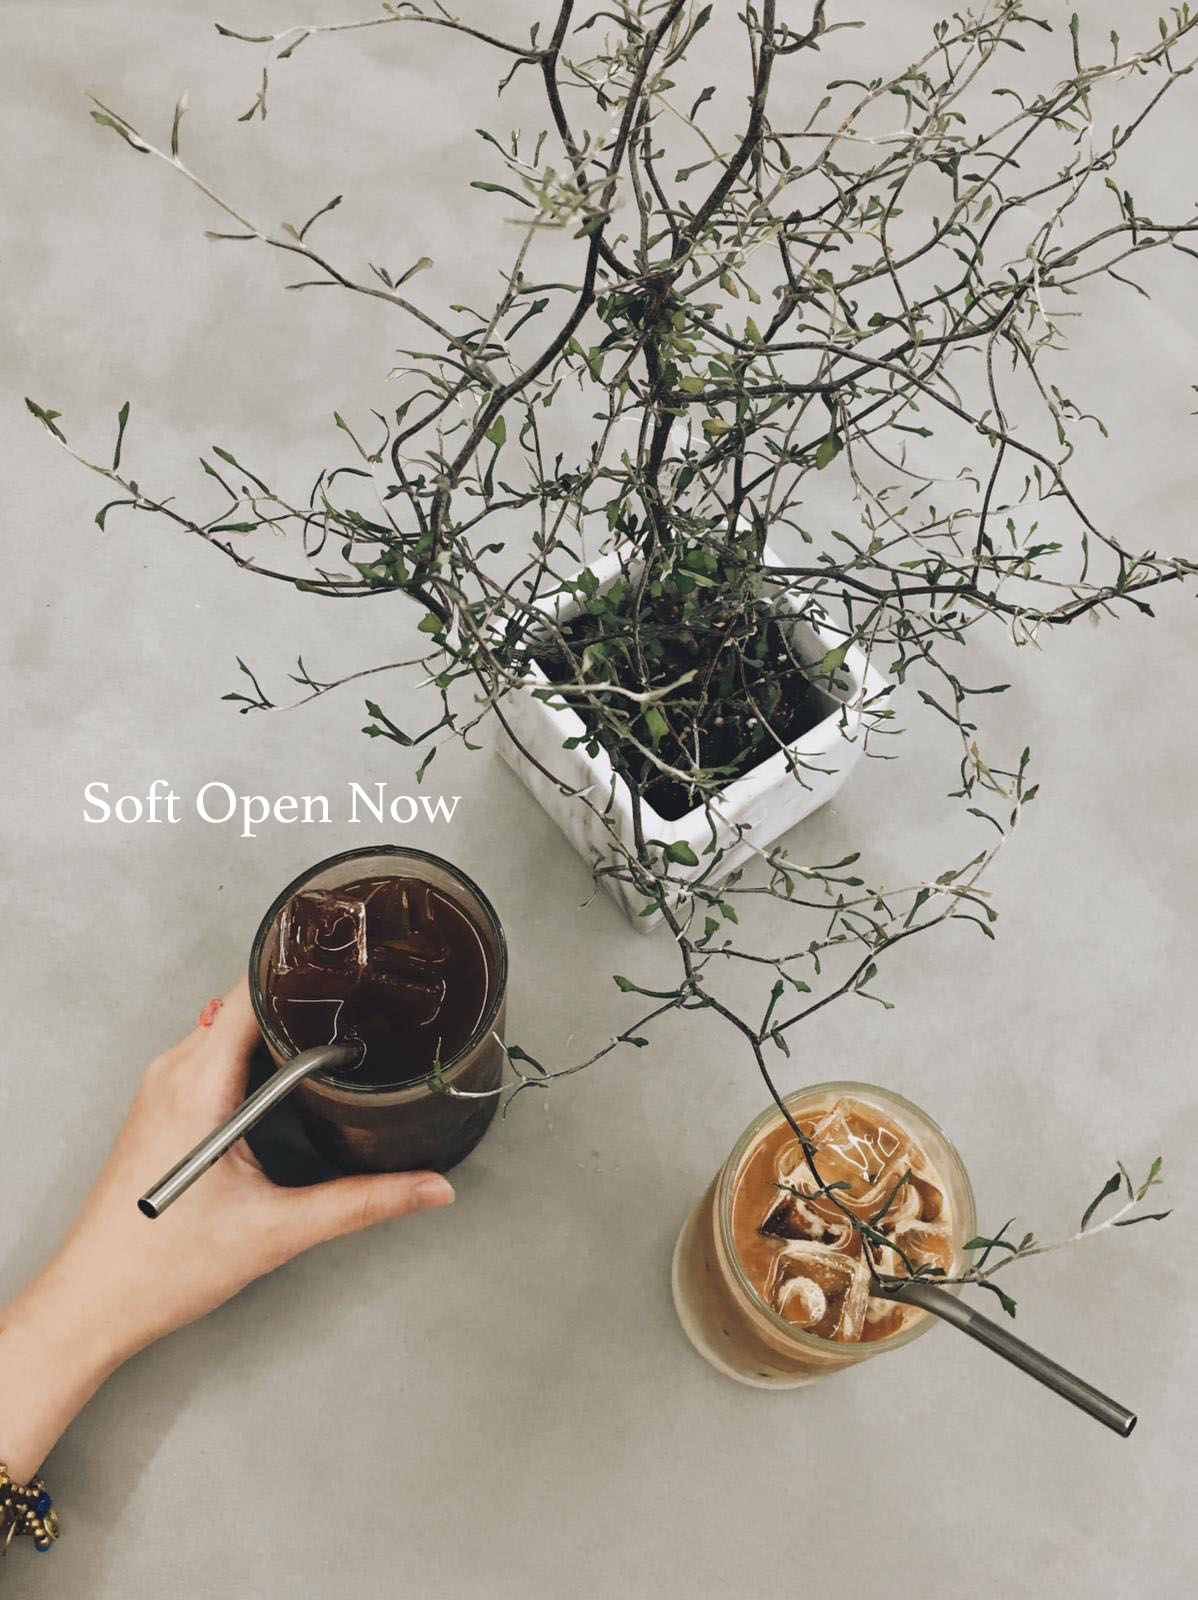  Soft open now! 我哋終於開始試業啦！🥳 從今日開始我哋會不時為大家帶來世界各地嘅咖啡豆 歡迎大家來搵我哋飲杯咖啡傾下計😄 Come and have a cup of coffee with us! We will be open from 8:30am to 8:30pm 